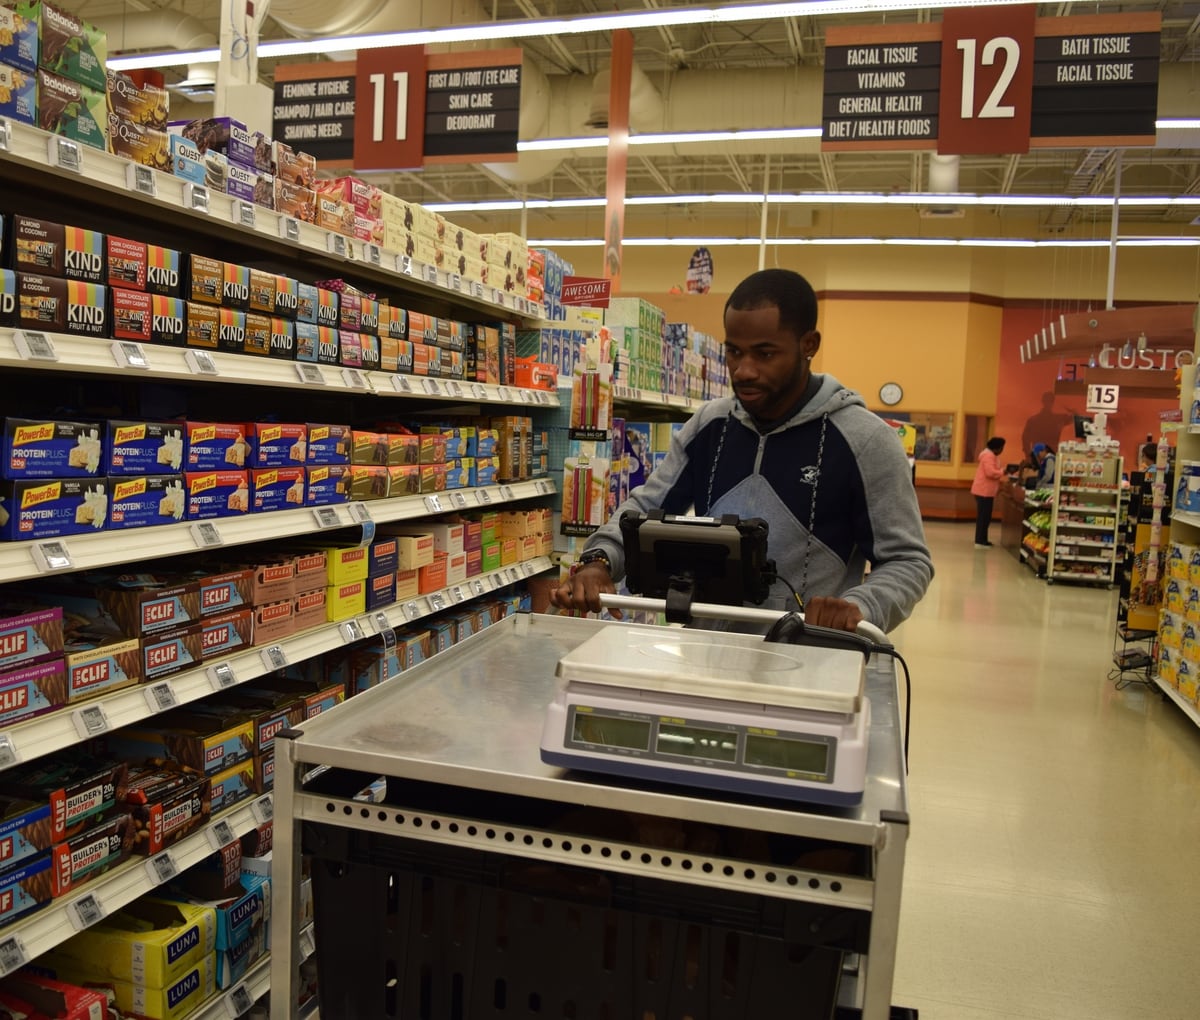 All stateside commissaries aim to have curbside pickup by the end of the year